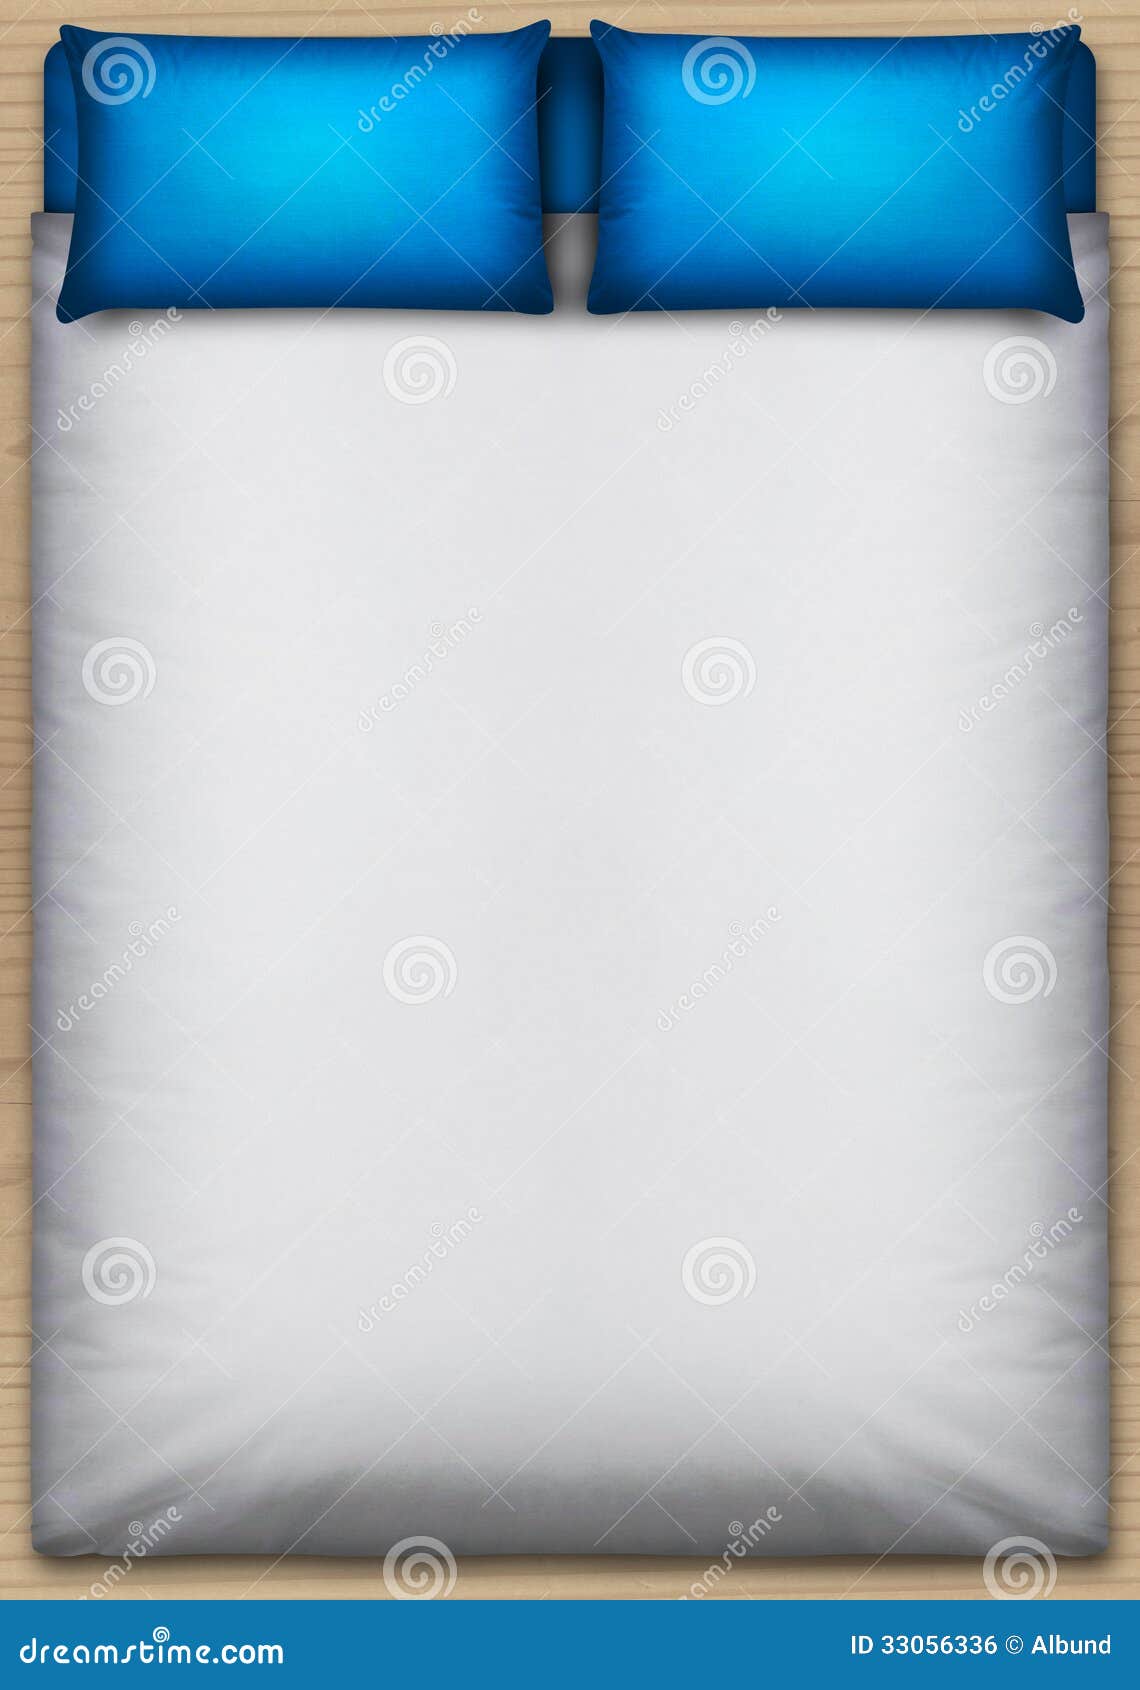 Bed And Bedding Direct Top Royalty Free Stock Image - Image: 33056336